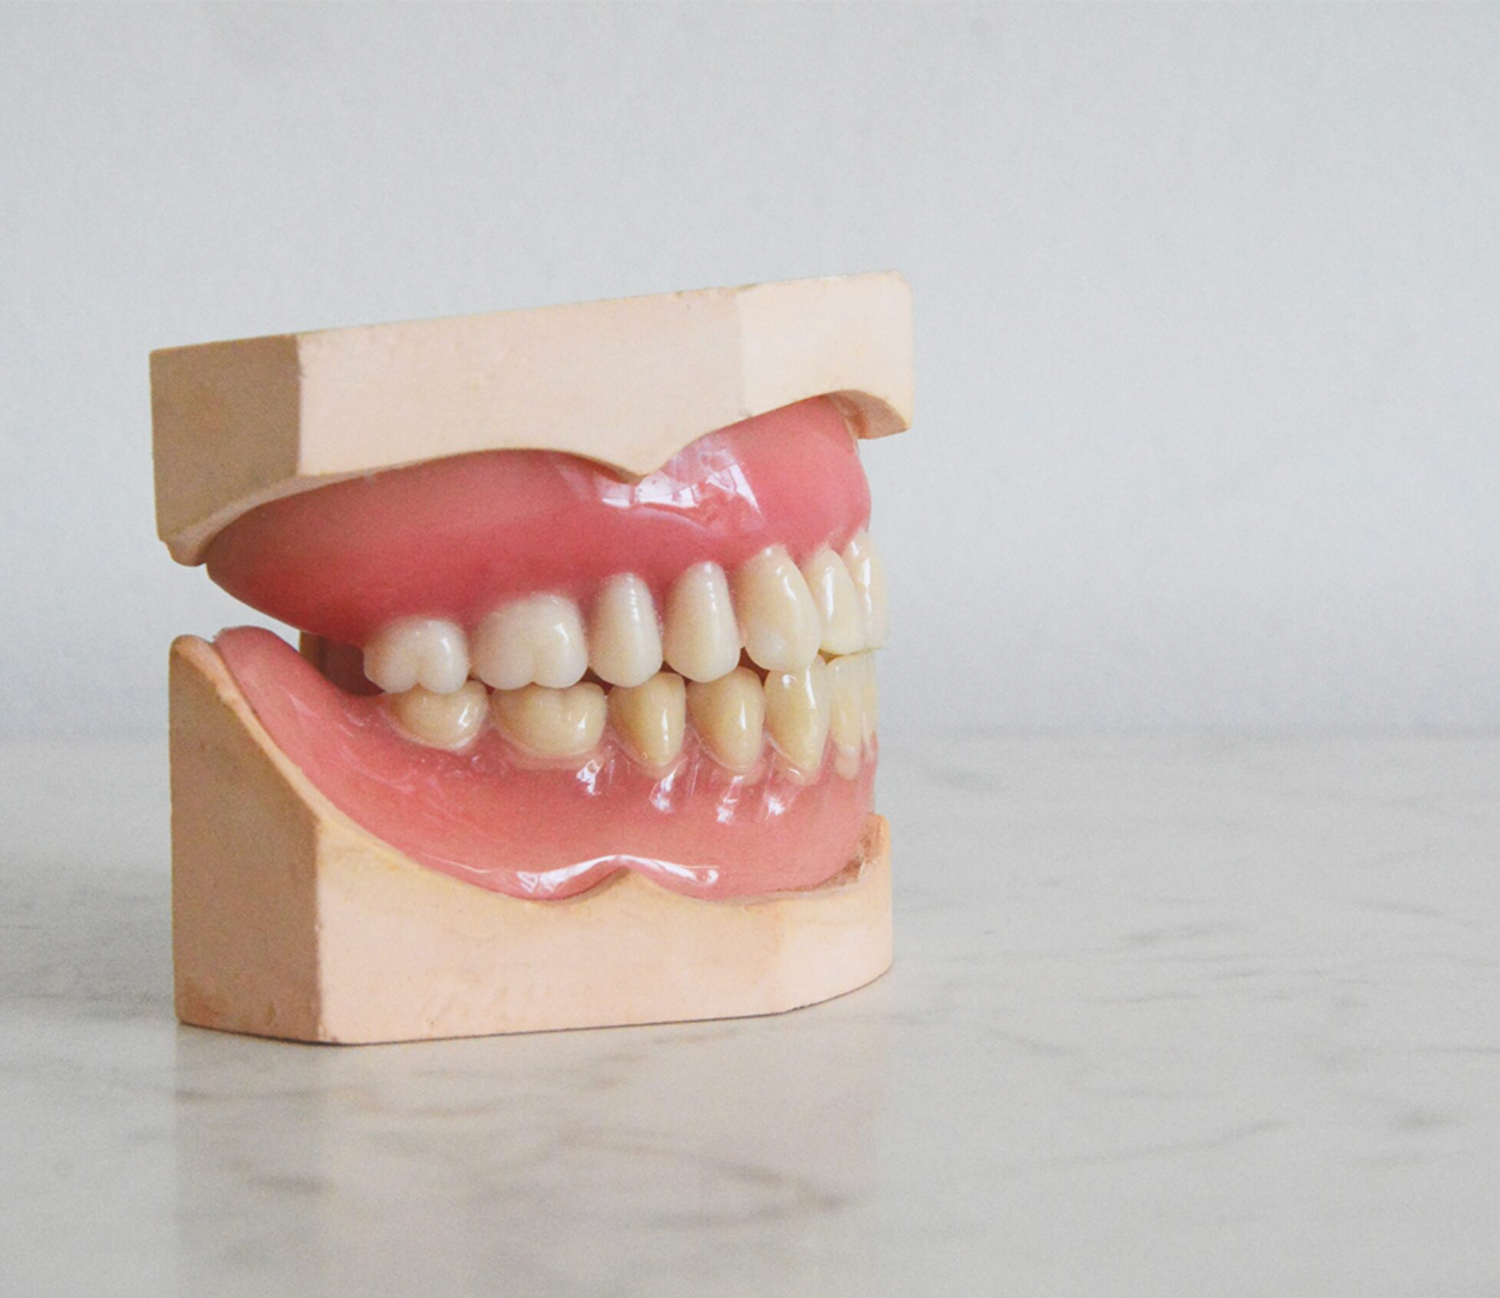 Full-mouth replica for educational used for educational purposes.